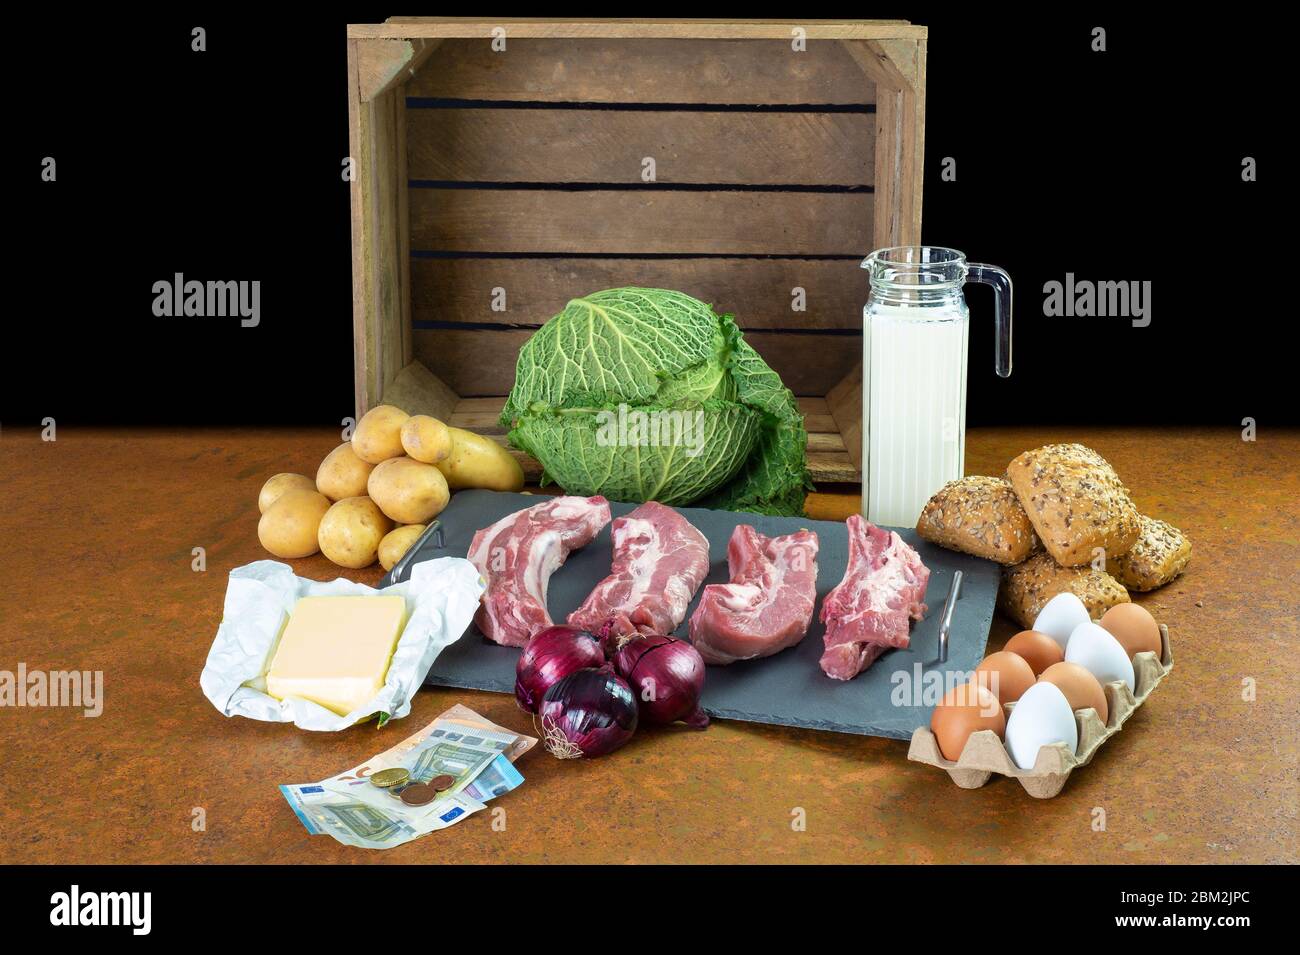 Food for basic needs. In the background is a wooden fruit box. In the foreground are euro banknotes. Stock Photo